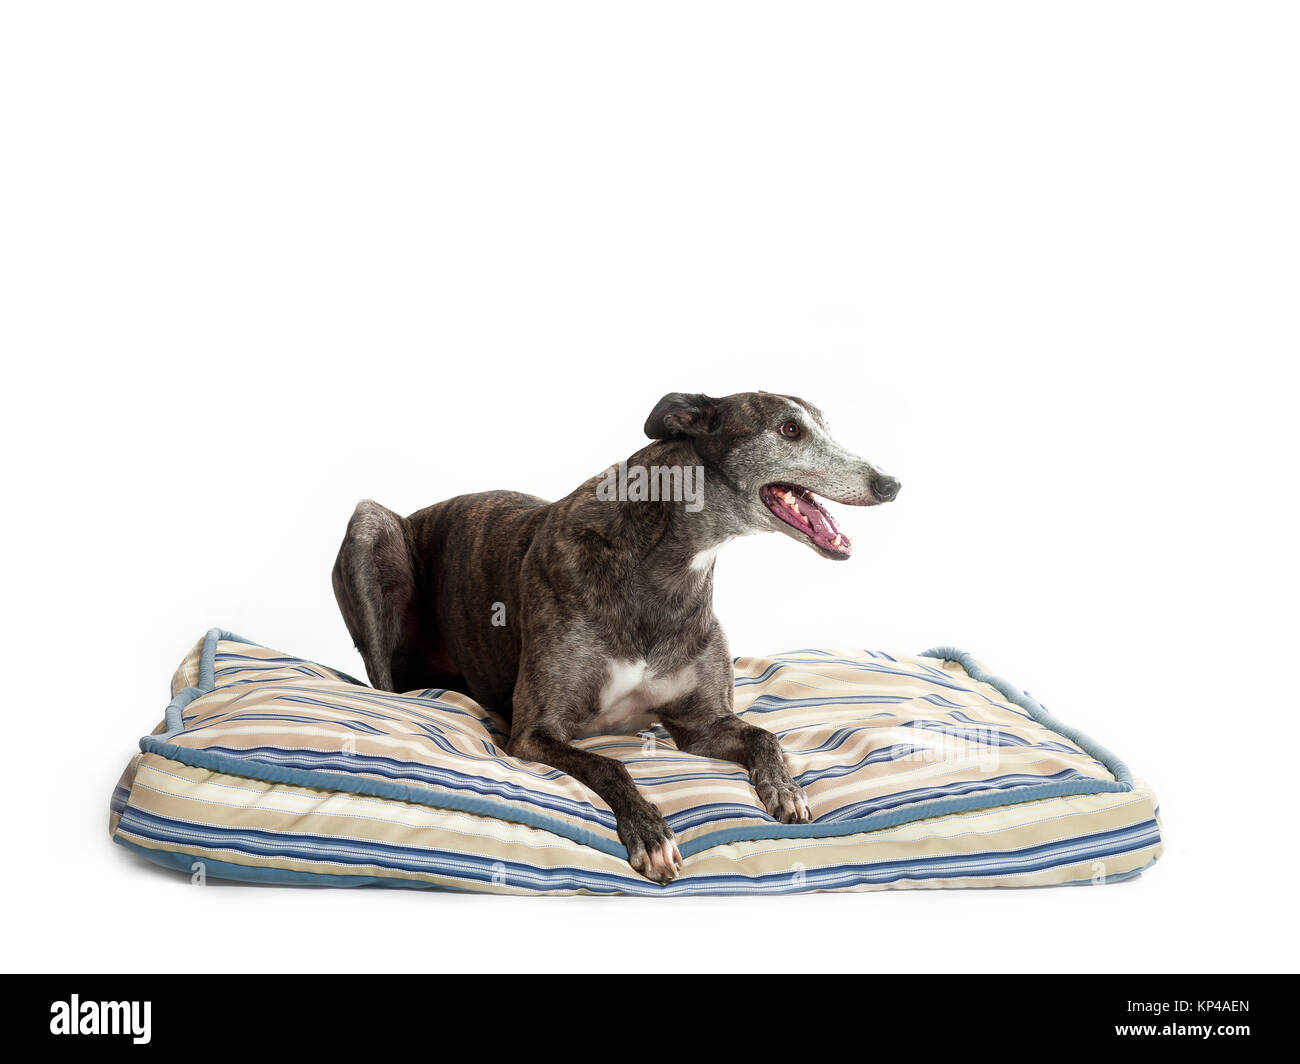 Greyhound on bed Banque D'Images